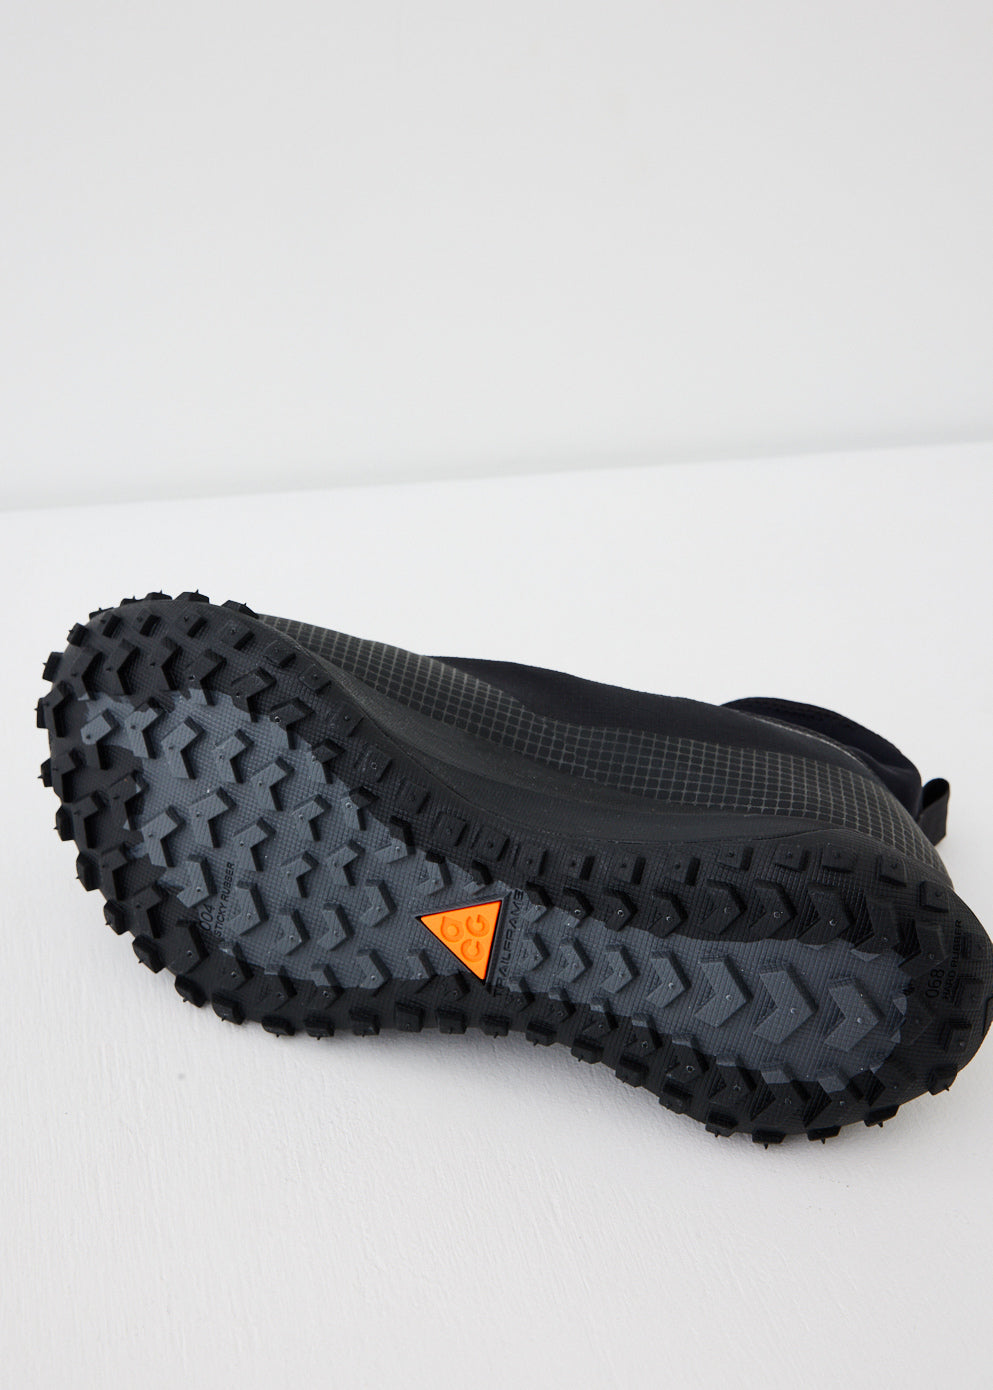 ACG Mountain Fly GORE-TEX Sneakers